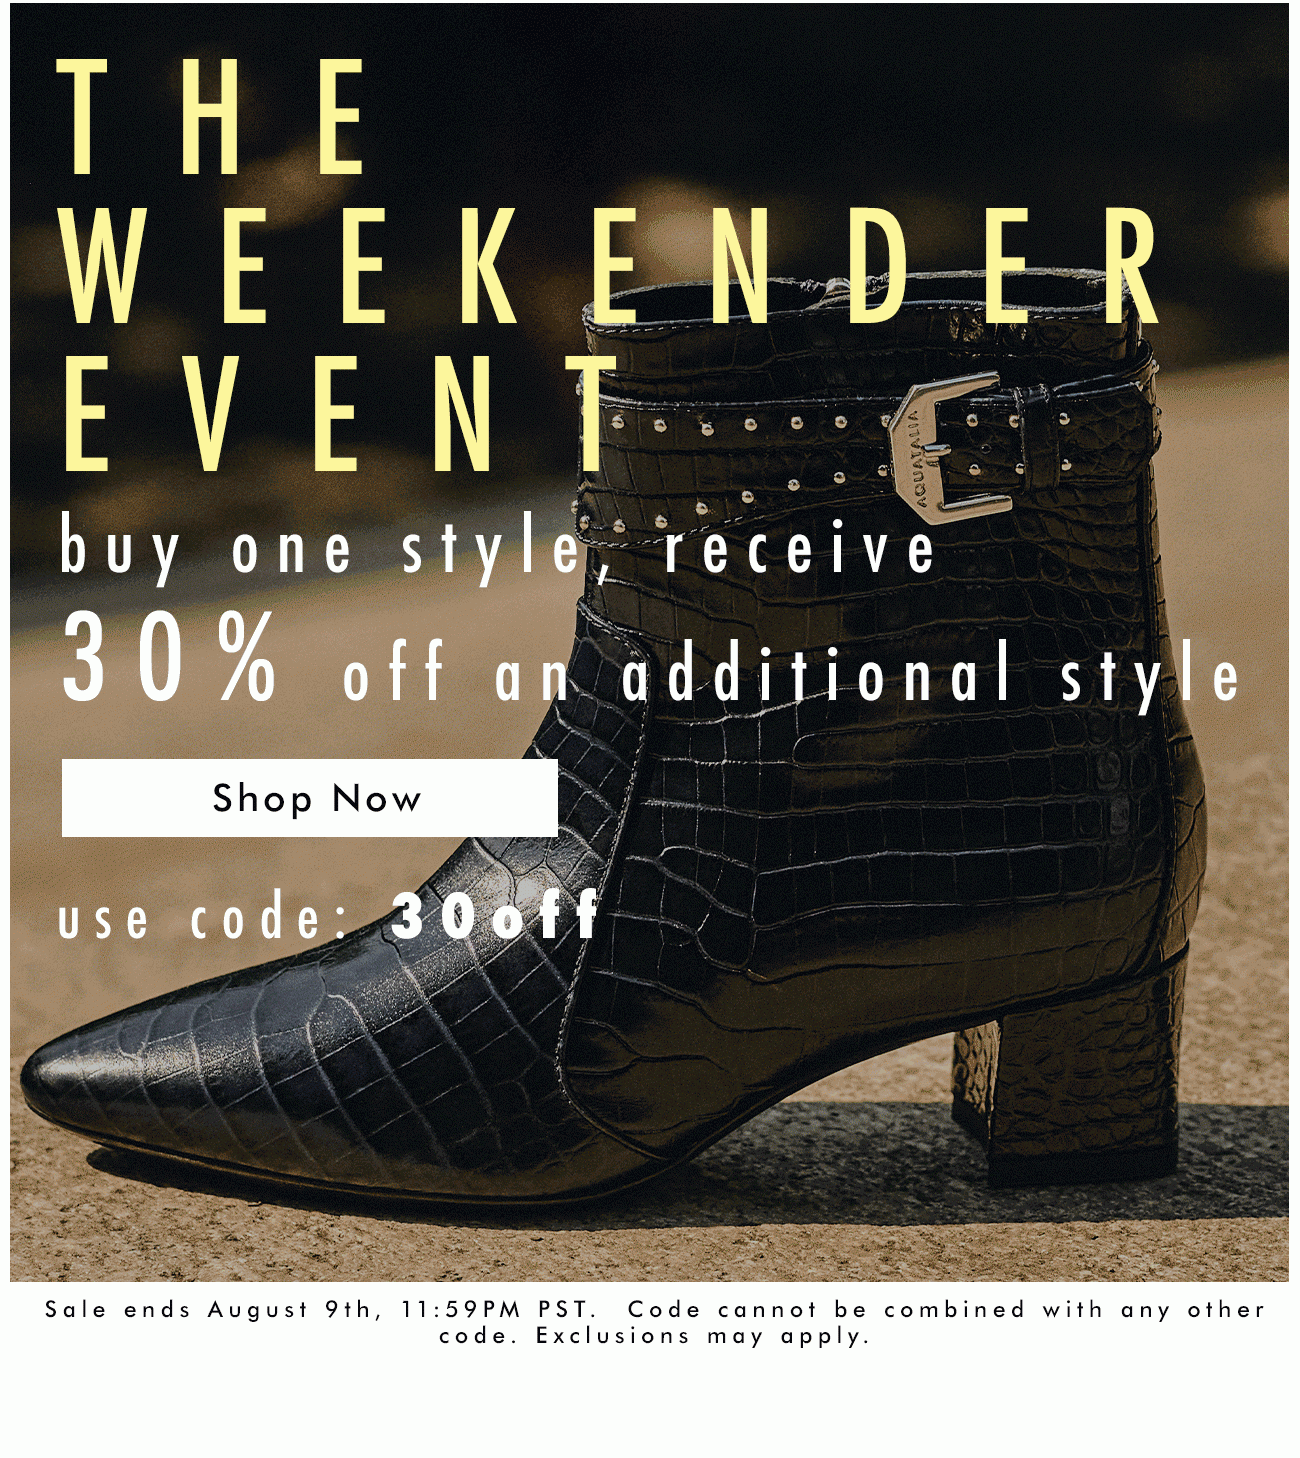 Receive 30% off an additional style